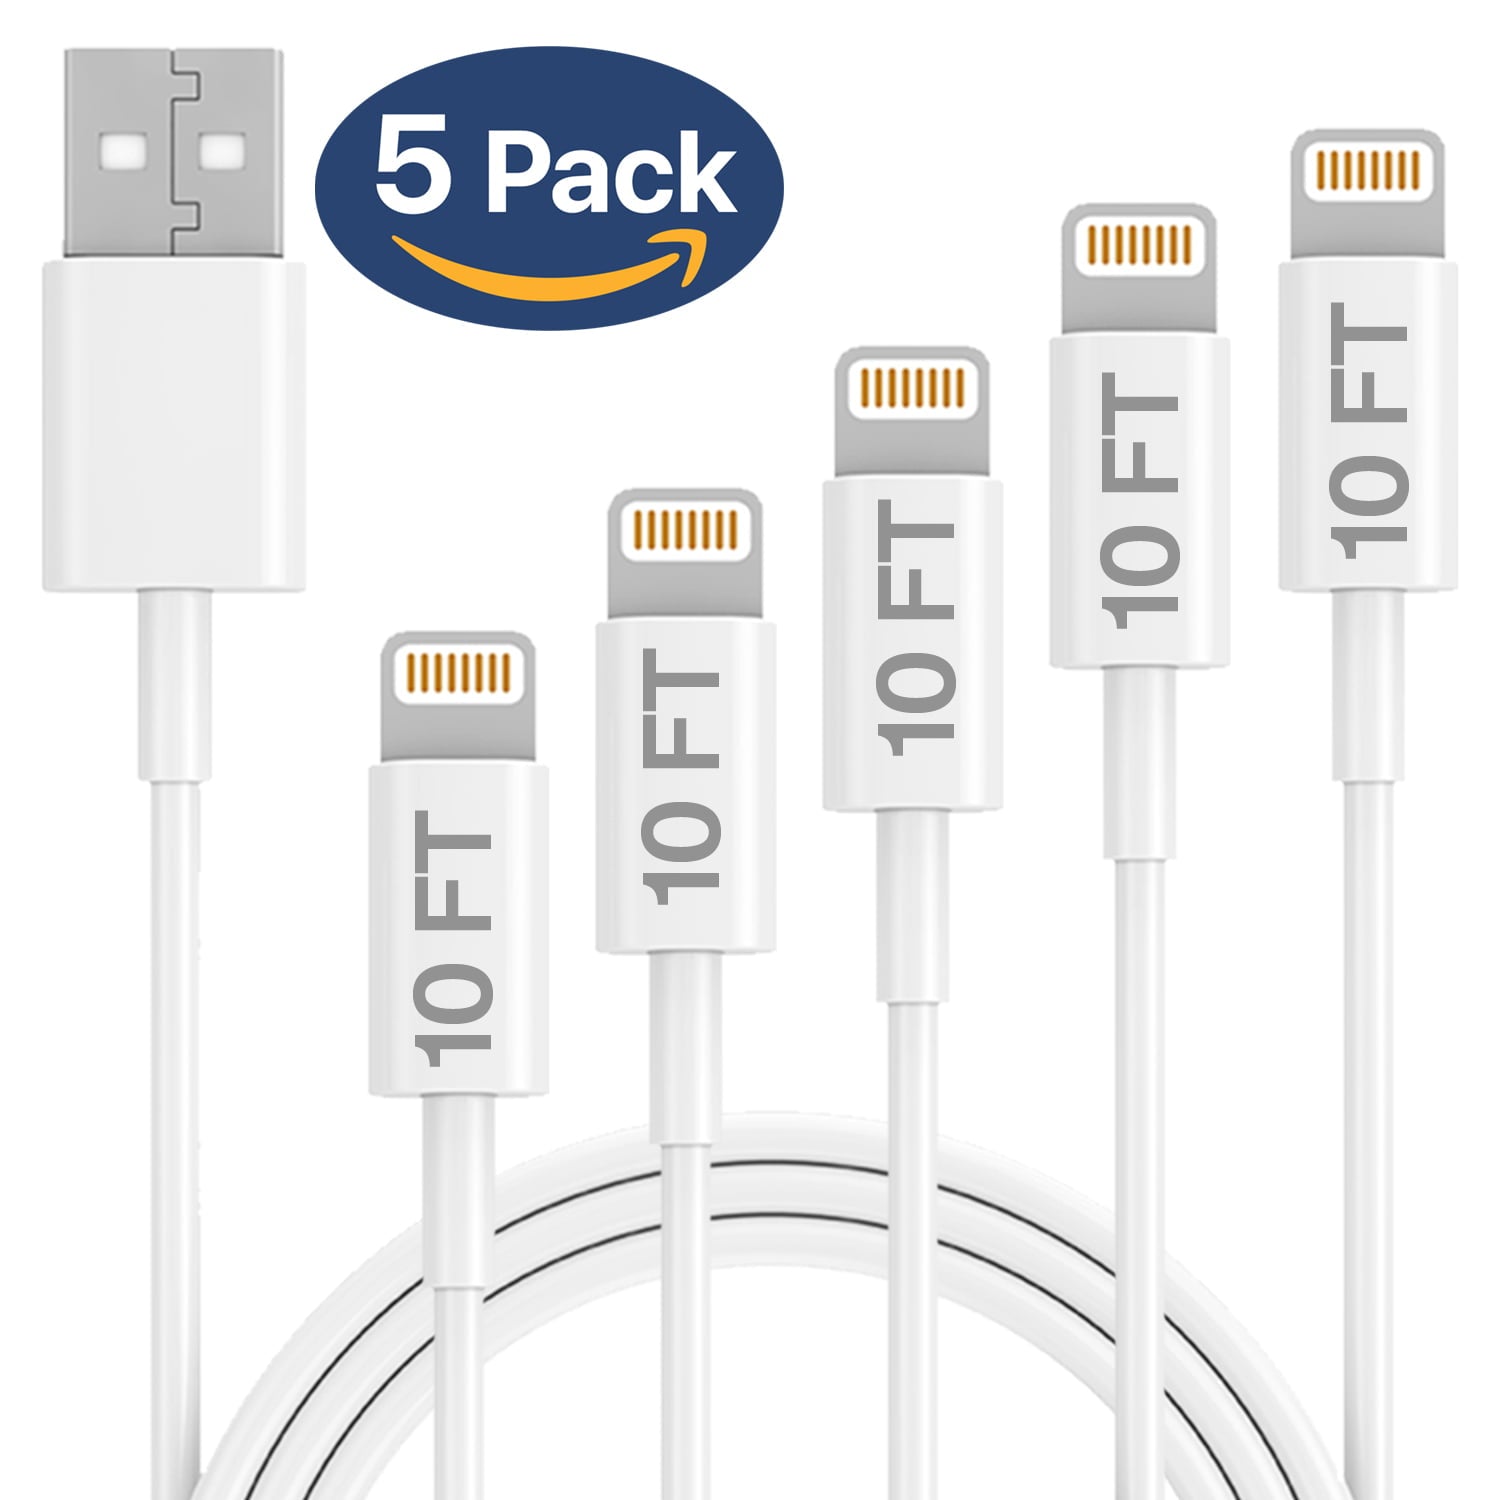 iPhone Charger Lightning Cable Set, Ixir, 5 Pack 10FT USB Cable, For Apple iPhone Xs,Xs Max,XR,X,8,8 Plus,7,7 Plus,6S,6S Plus,iPad Air,Mini,iPod Touch,Case, Certified Charging & Syncing Cord